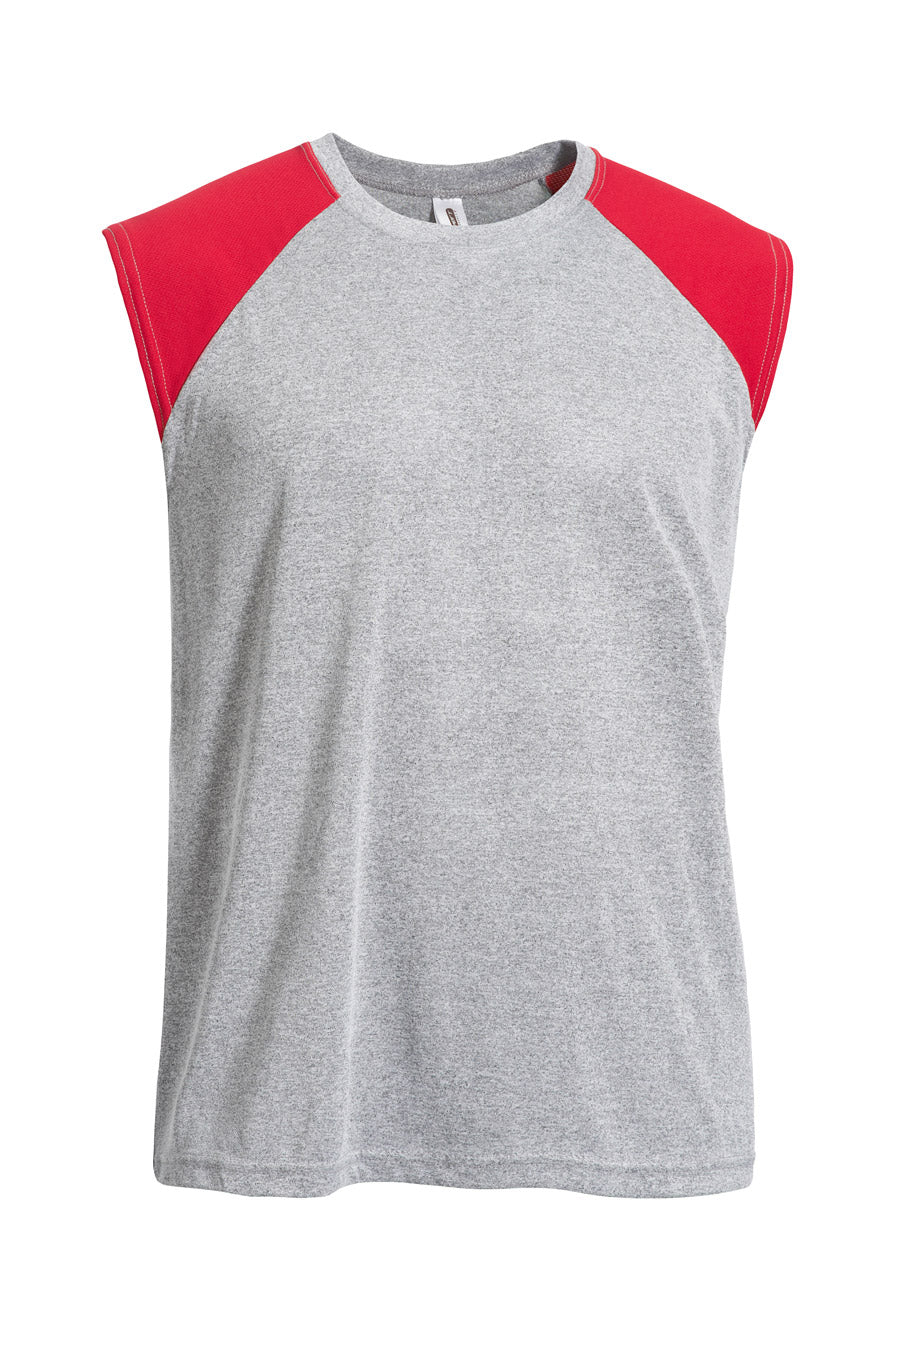 Natural Feel Jersey Colorblock Training Tank 🇺🇸 - Expert Brand Apparel#color_gray-heather-red